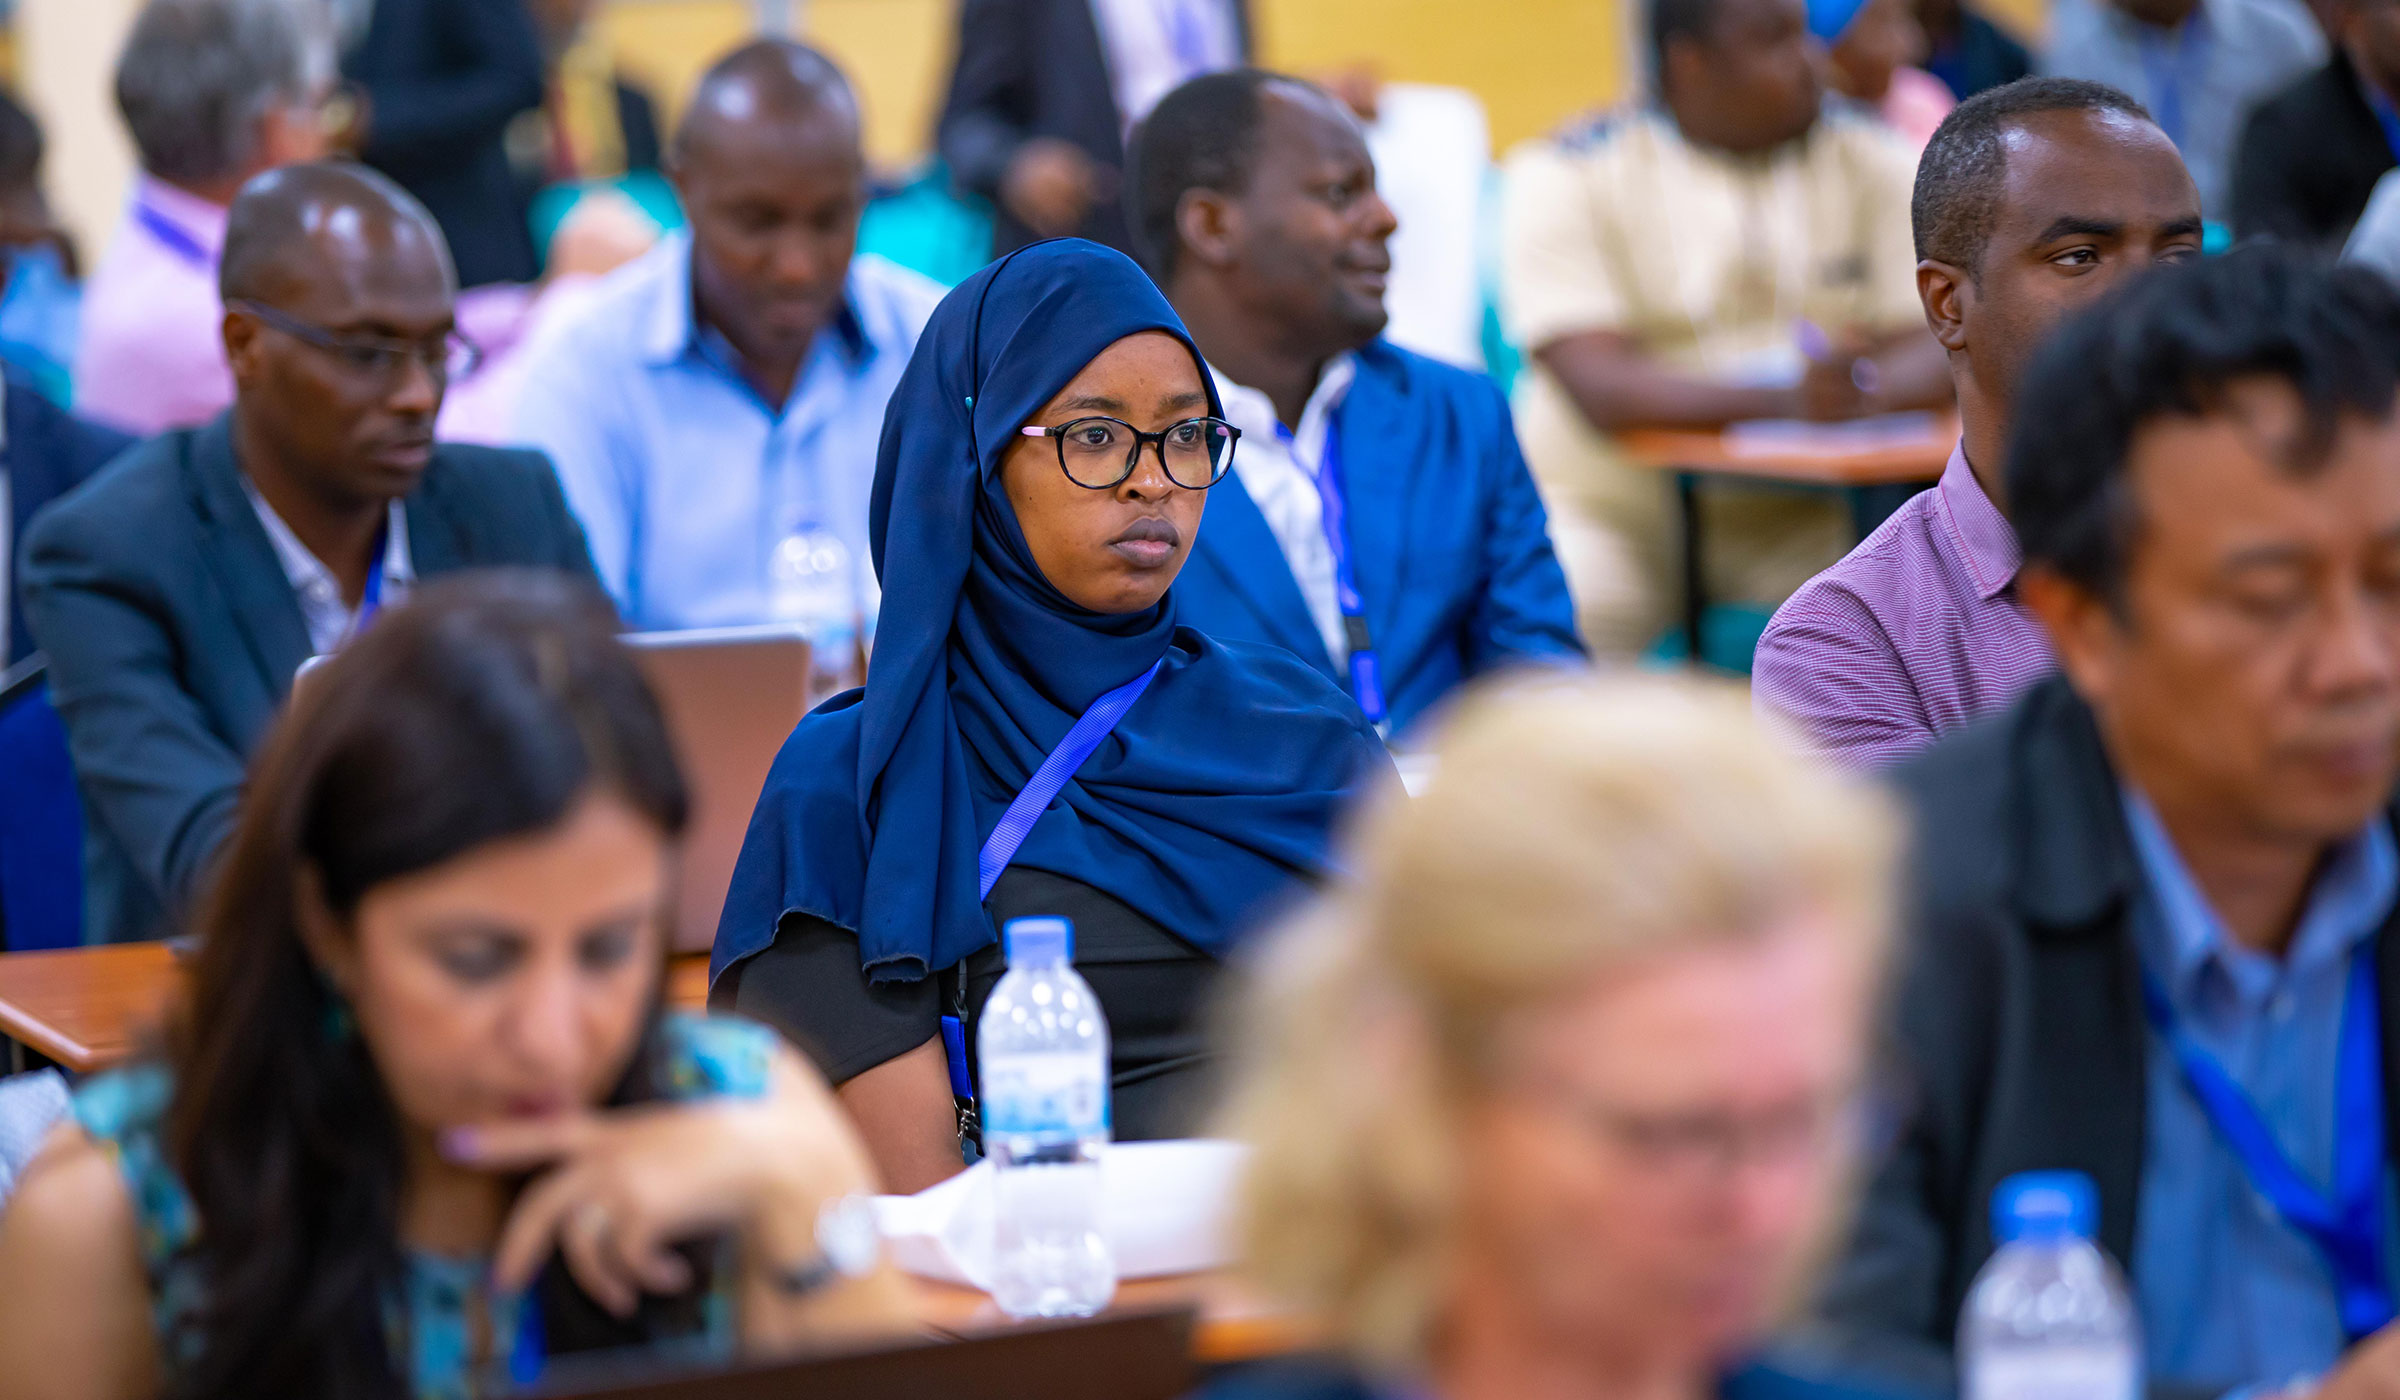 Participants follow a presentation at the UNBigData2019 event in Kigali yesterday. Emmanuel Kwizera.